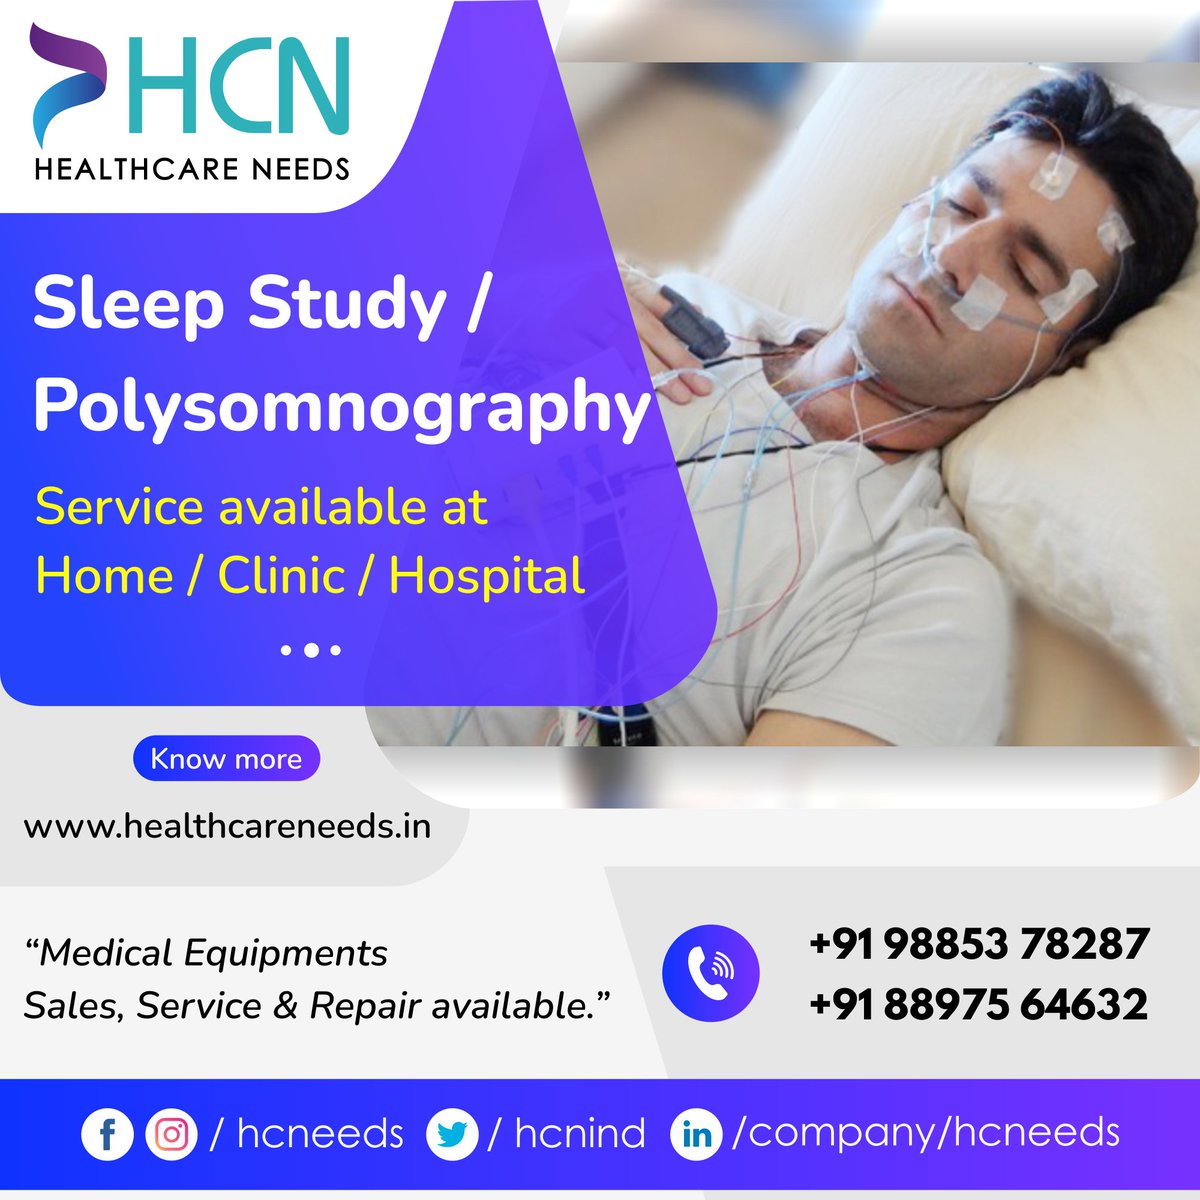 Sleep Study Test (Polysomnography Study) Available.
Medical Equipments Sales, Service and Repair available.

Healthcareneeds is one of the best Sleep Study (Polysomnography Study) Service provider in Hyderabad & Andhra Pradesh. We provide Medical equipment on rent/sale basis.